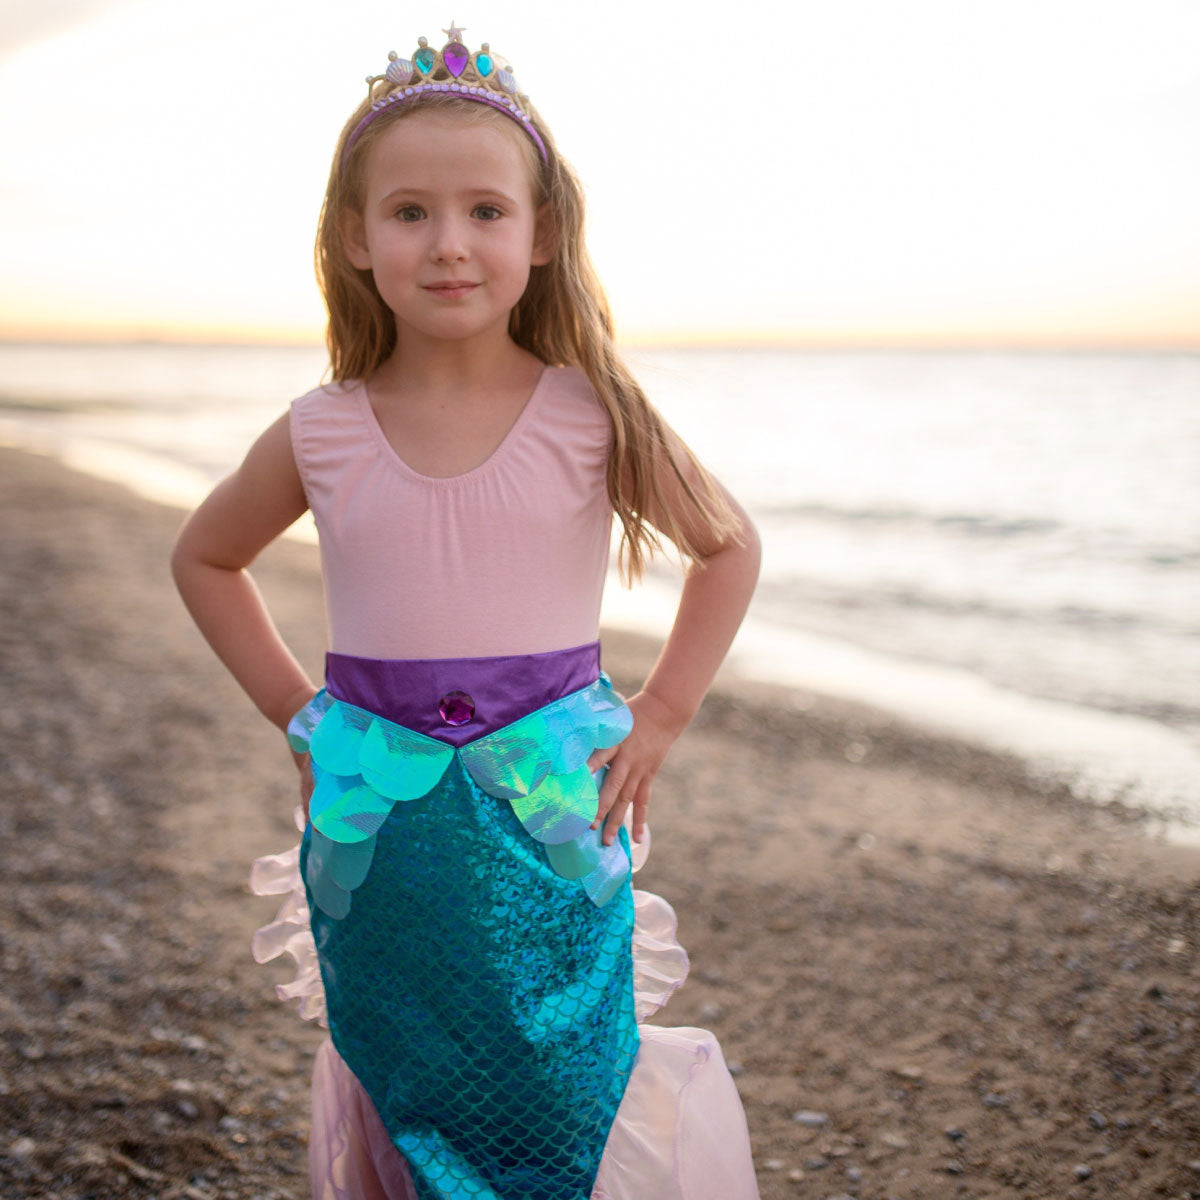 Mermaid Glimmer Skirts with Headband from Great Pretenders